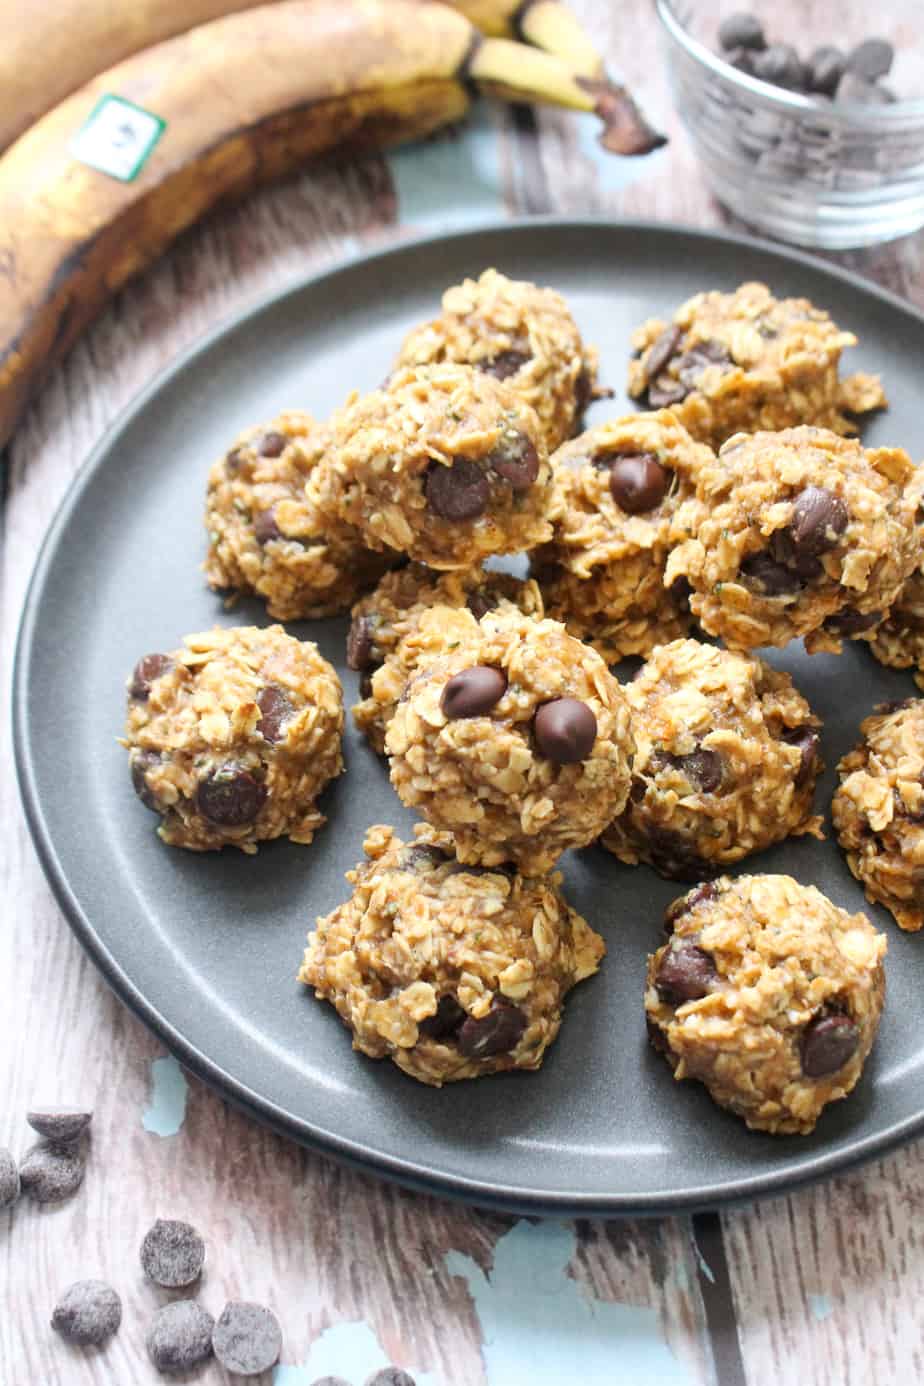 Plate of chocolate chip oat cookies